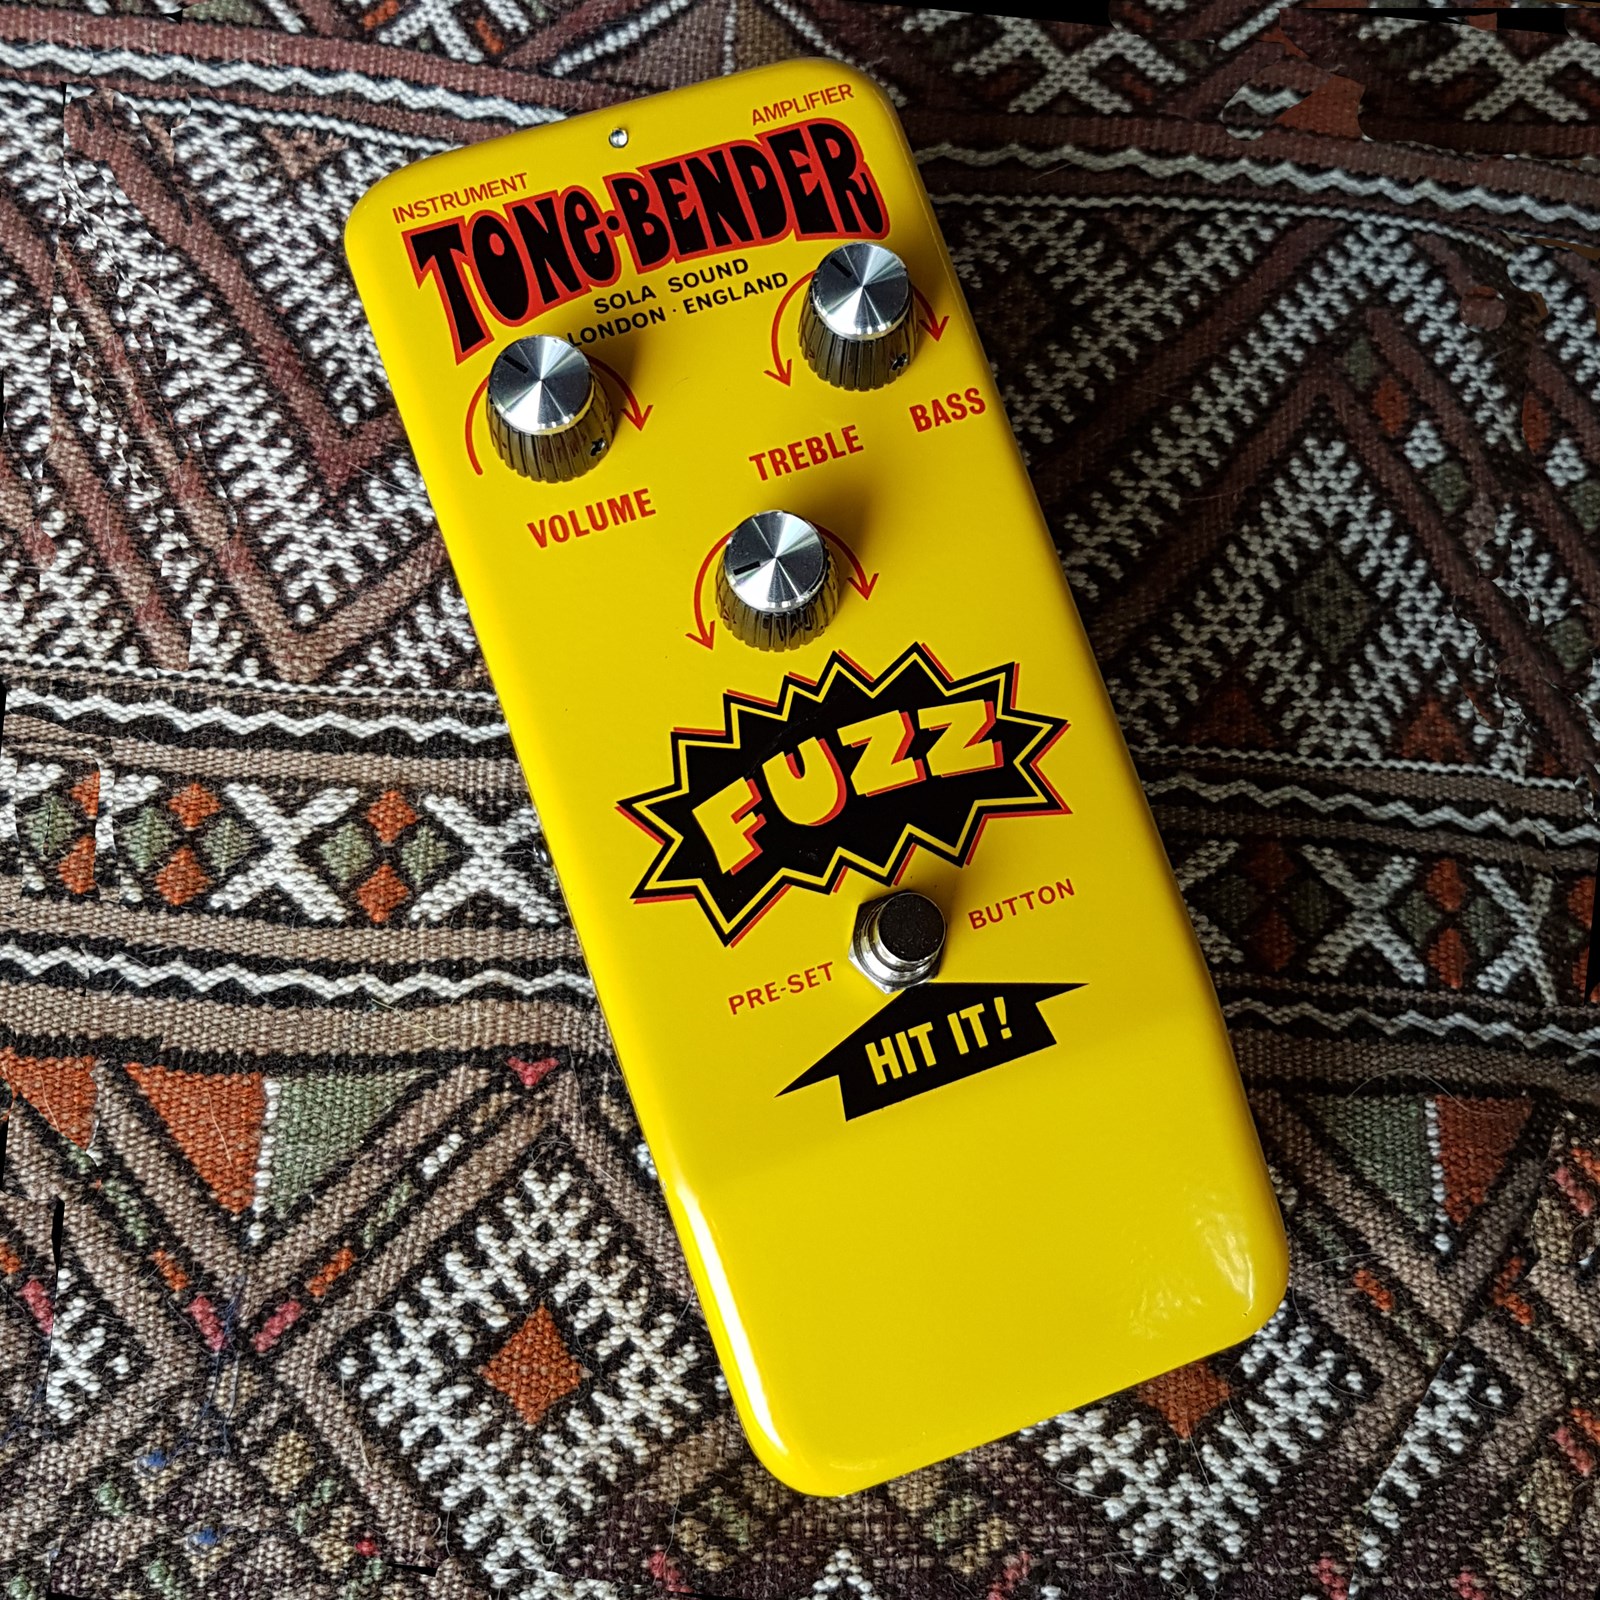 The Yellow Hybrid OC140 Tone Bender by jake r ....